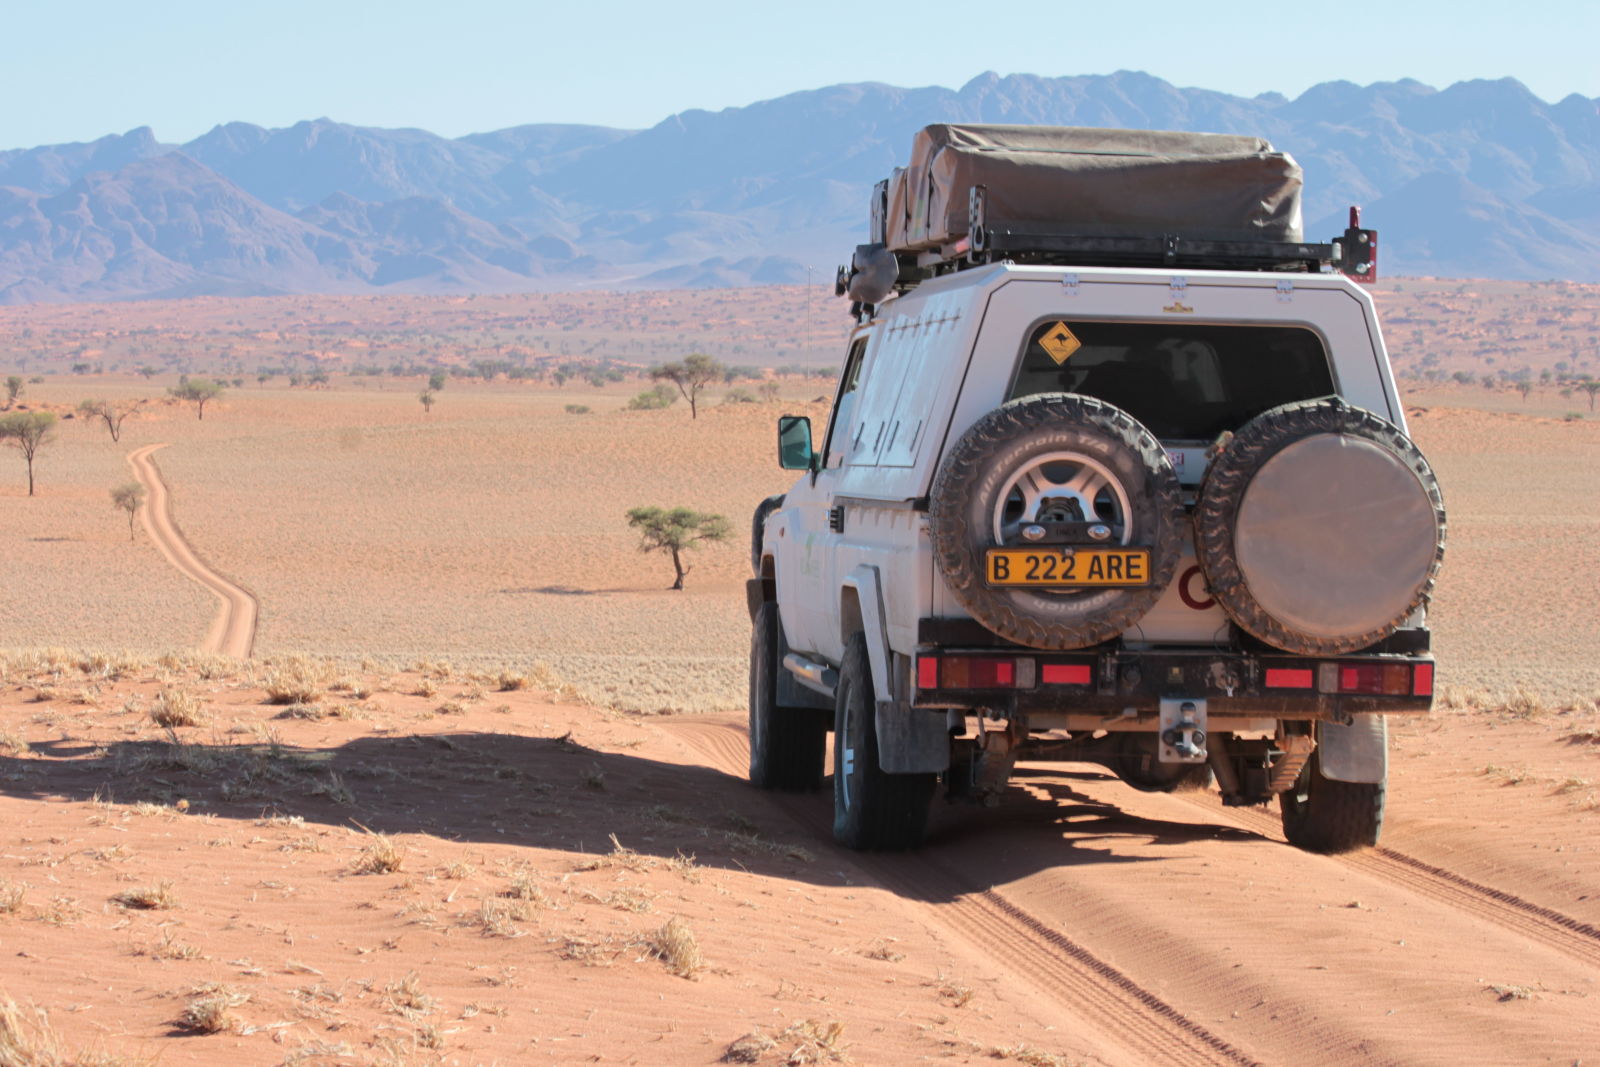 The Cruiser in its element. Namibia.